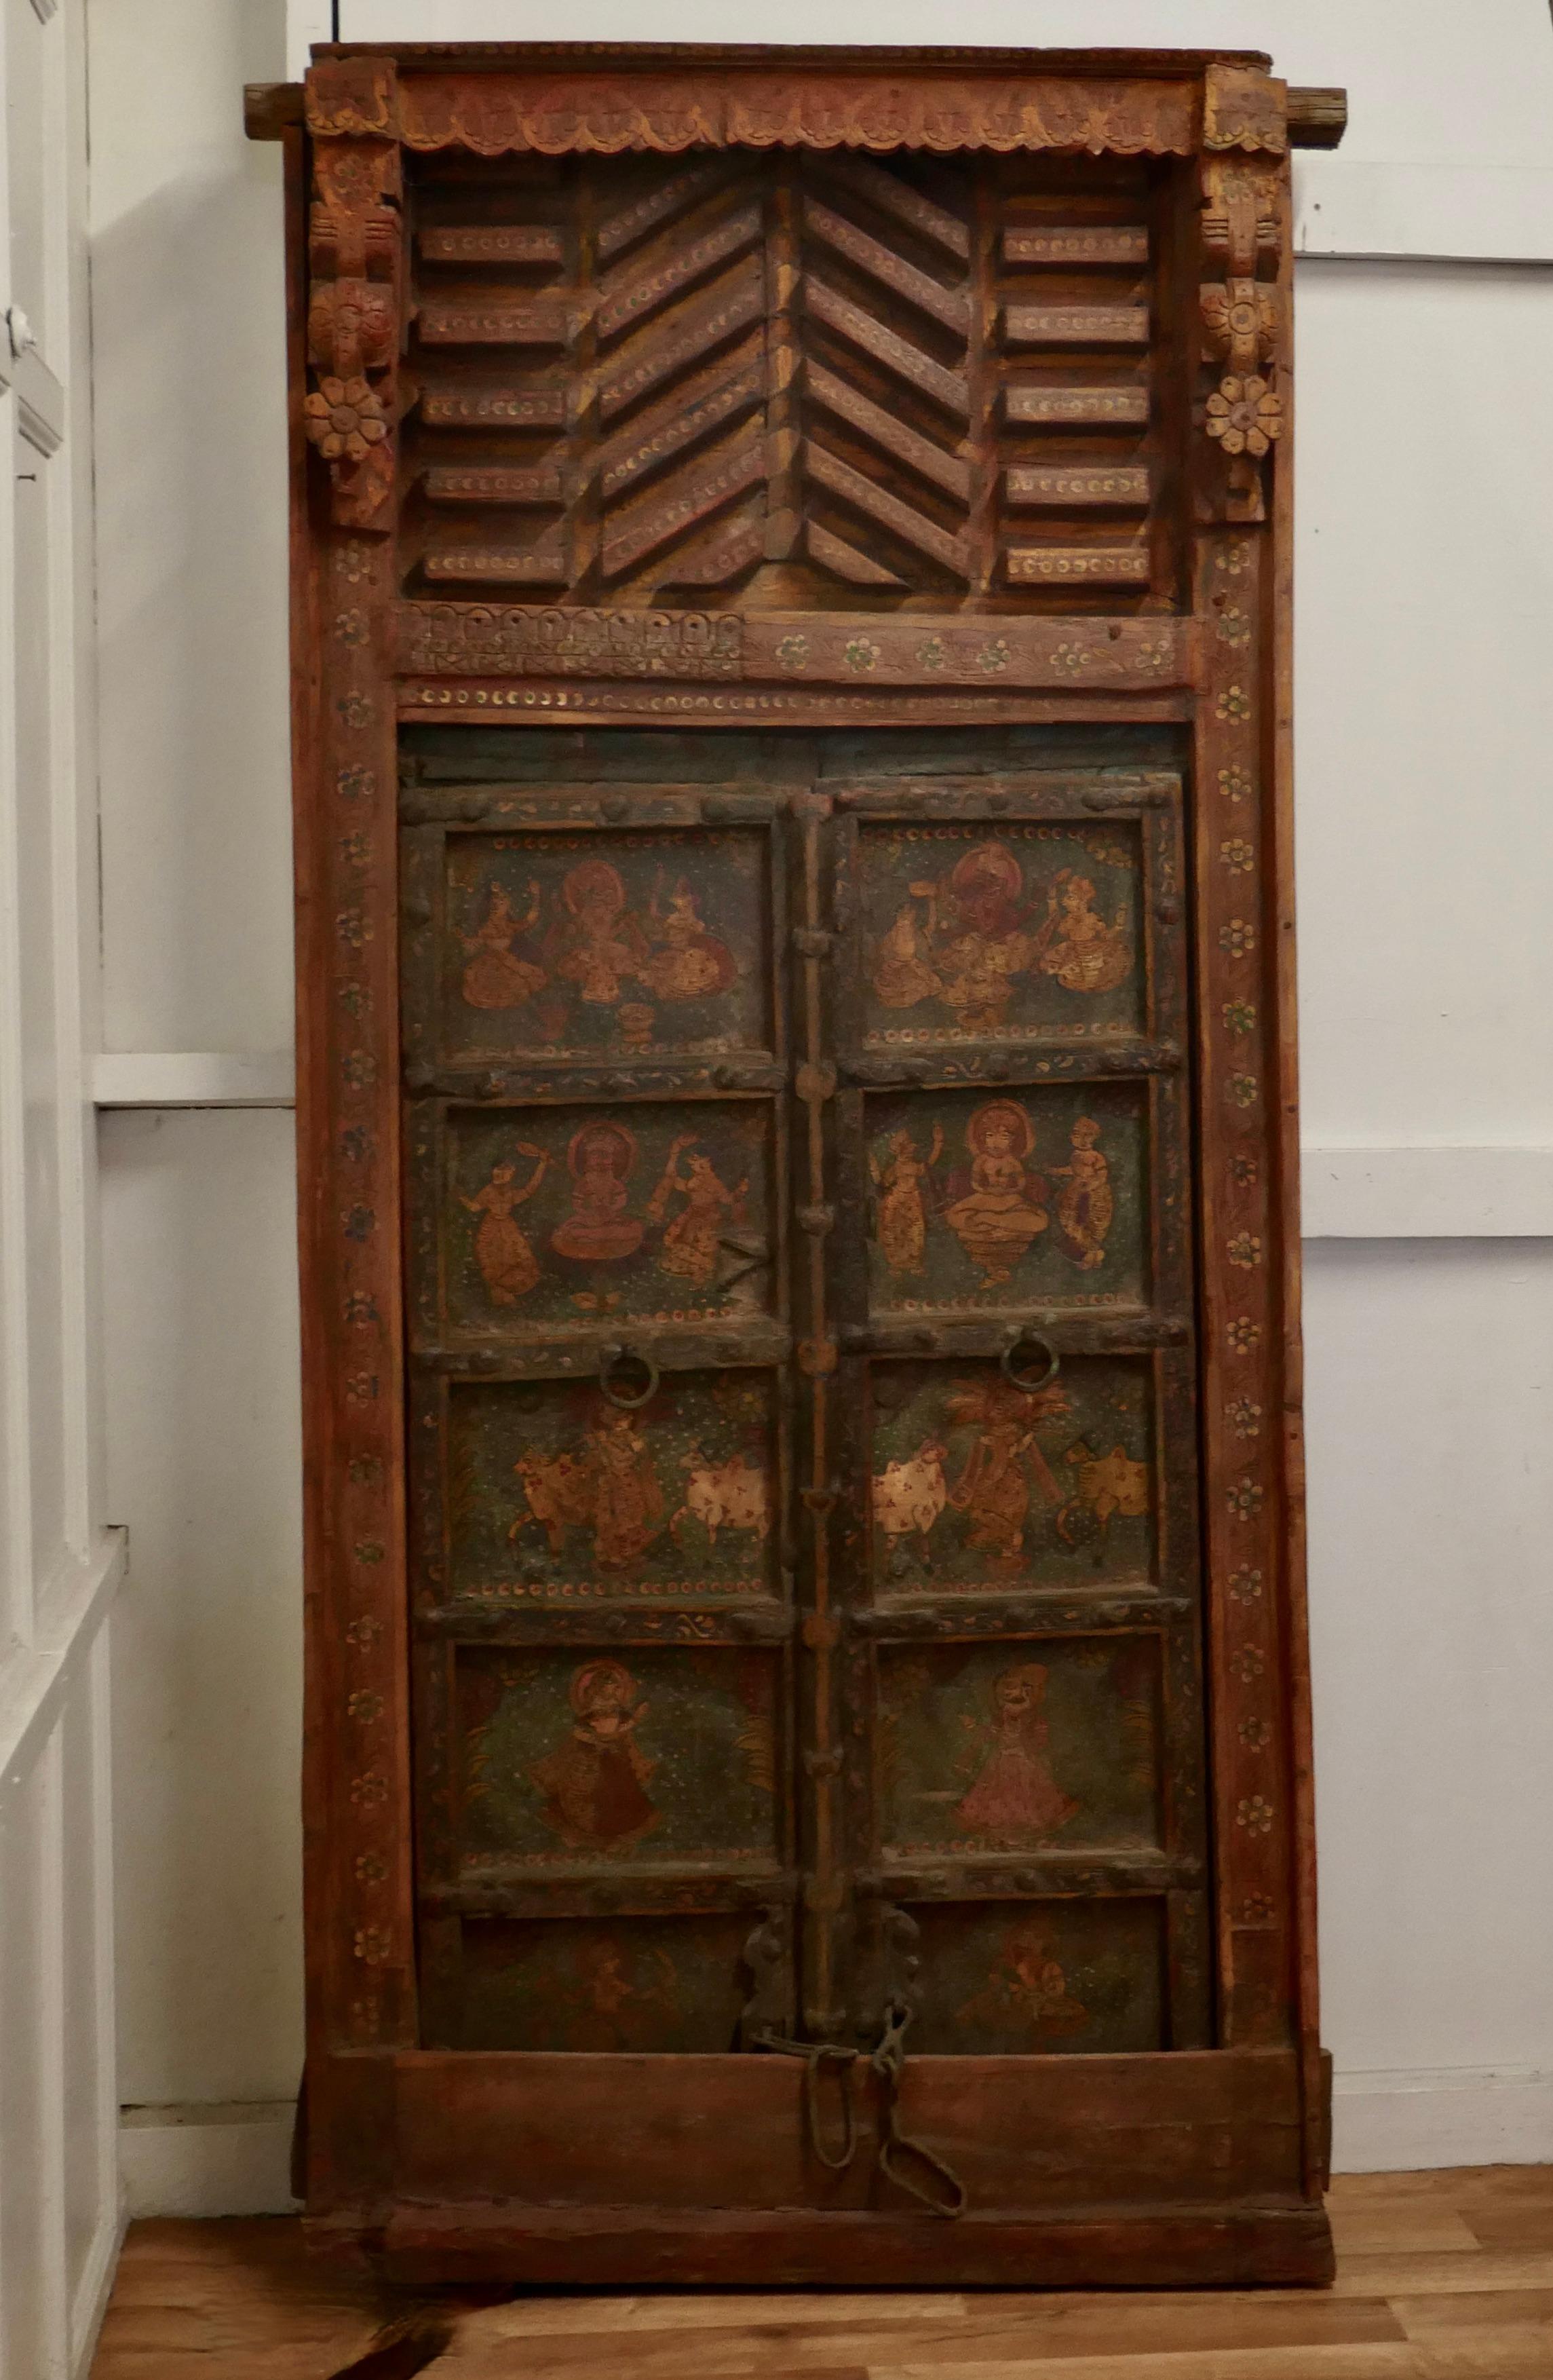 Anglo Indian Painted Doors in Original Frame, Wall Art In Good Condition For Sale In Chillerton, Isle of Wight